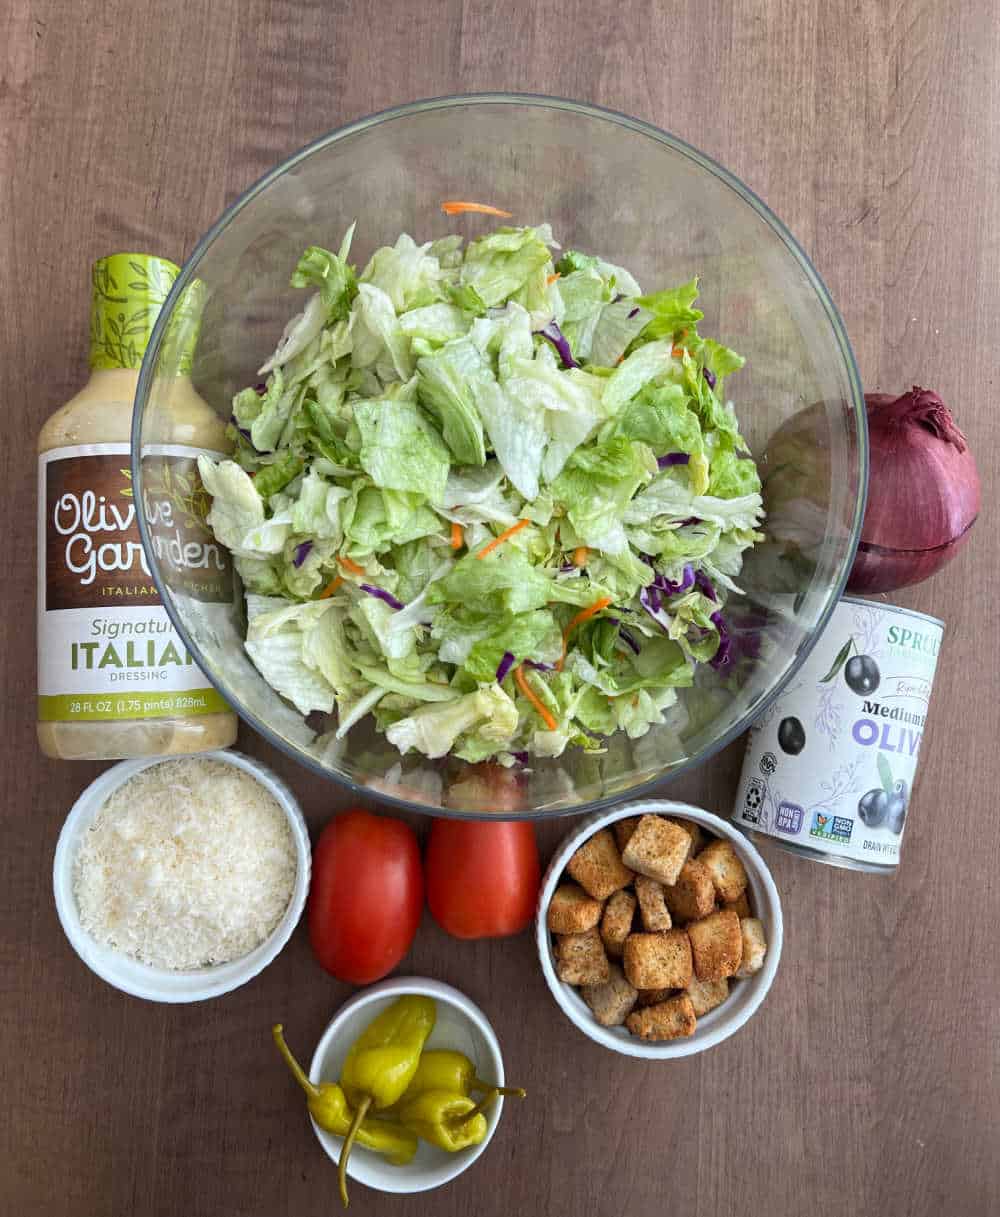 iceberg lettuce, salad dressing, parmesan cheese, peppers, tomatoes, croutons, olives, red onion.